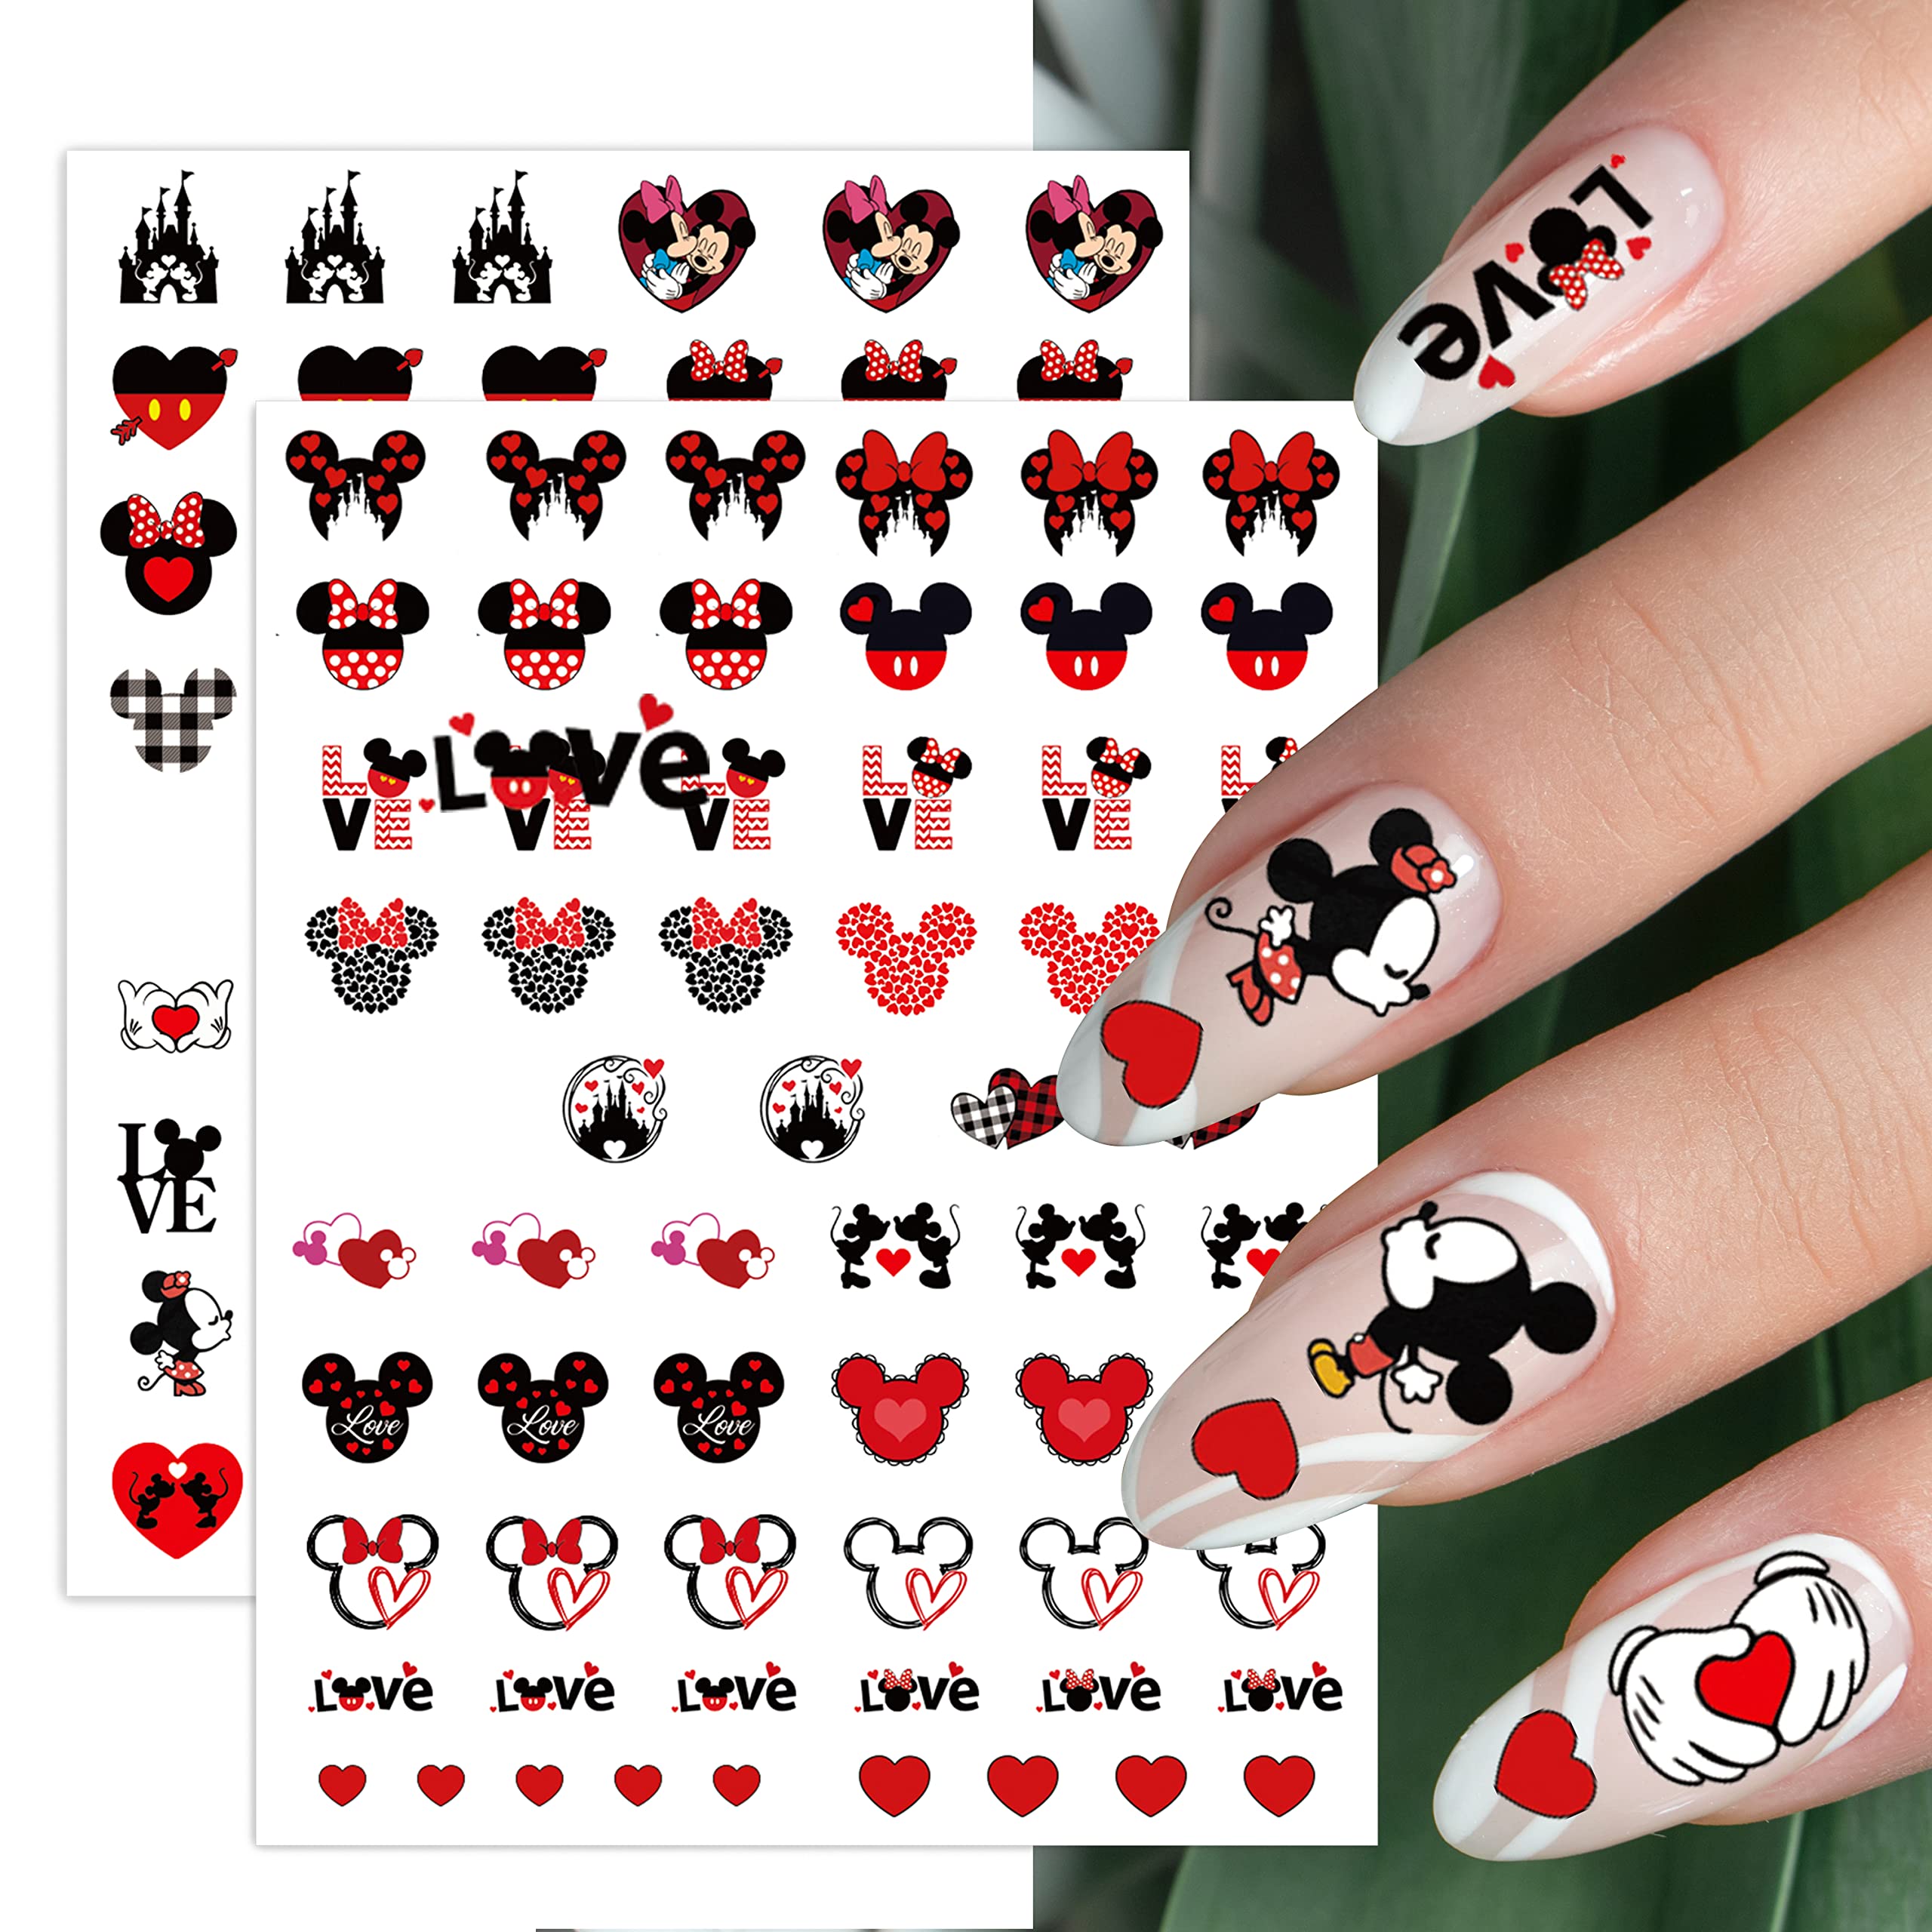 Nail Art Sticker Popular Cartoon Brand Mickey Mouse Nails For